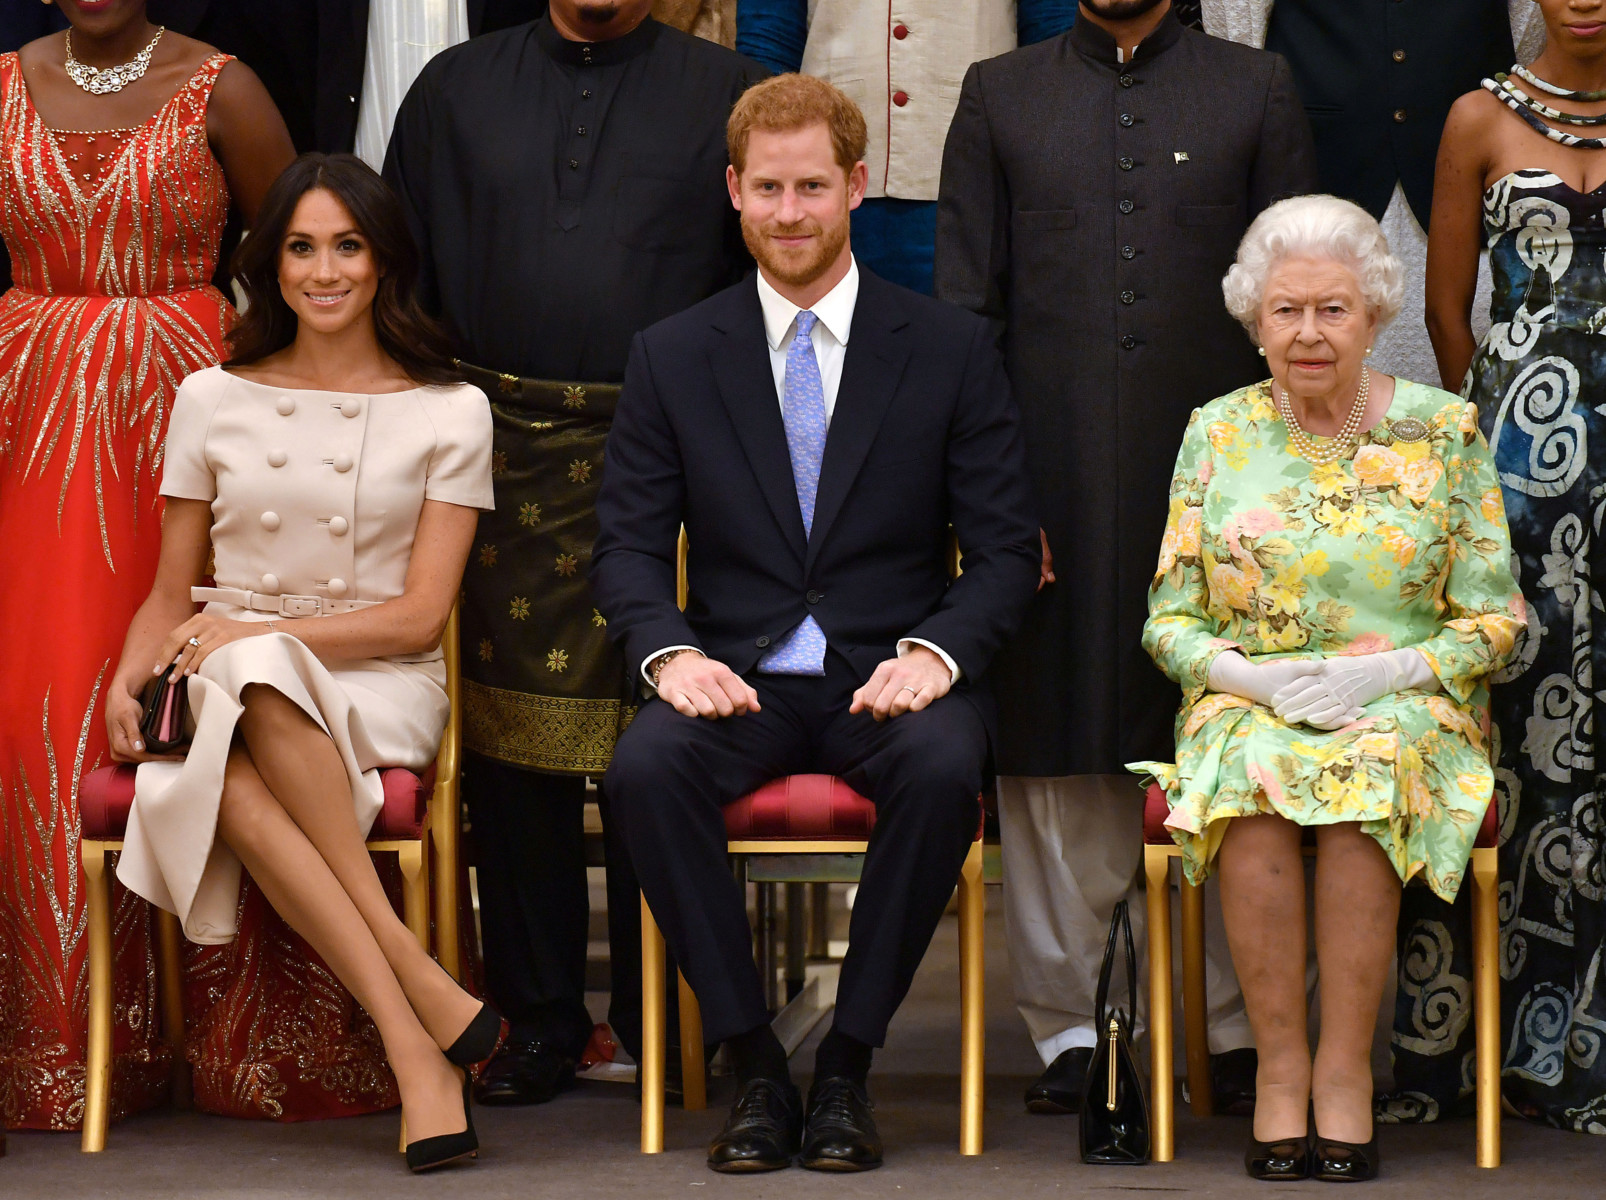 : Britain's Queen Elizabeth, Prince Harry and Meghan, the Duchess of Sussex pose for a picture with some of Queen's Young Leaders at a Buckingham Palace reception following the final Queen's Young Leaders Awards Ceremony, in London